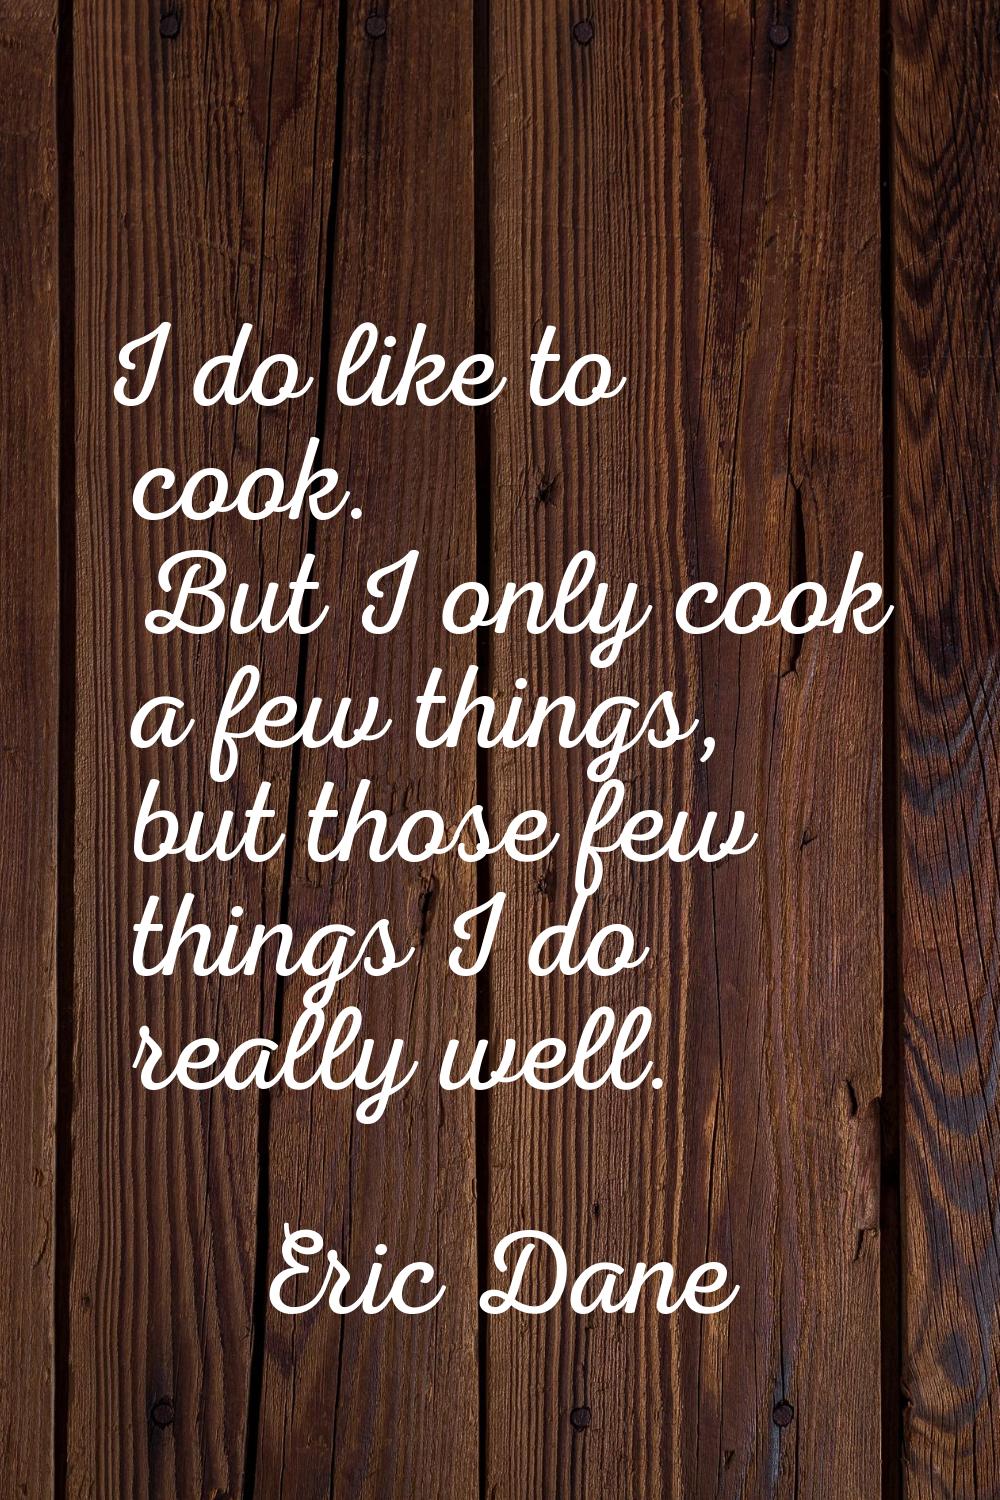 I do like to cook. But I only cook a few things, but those few things I do really well.